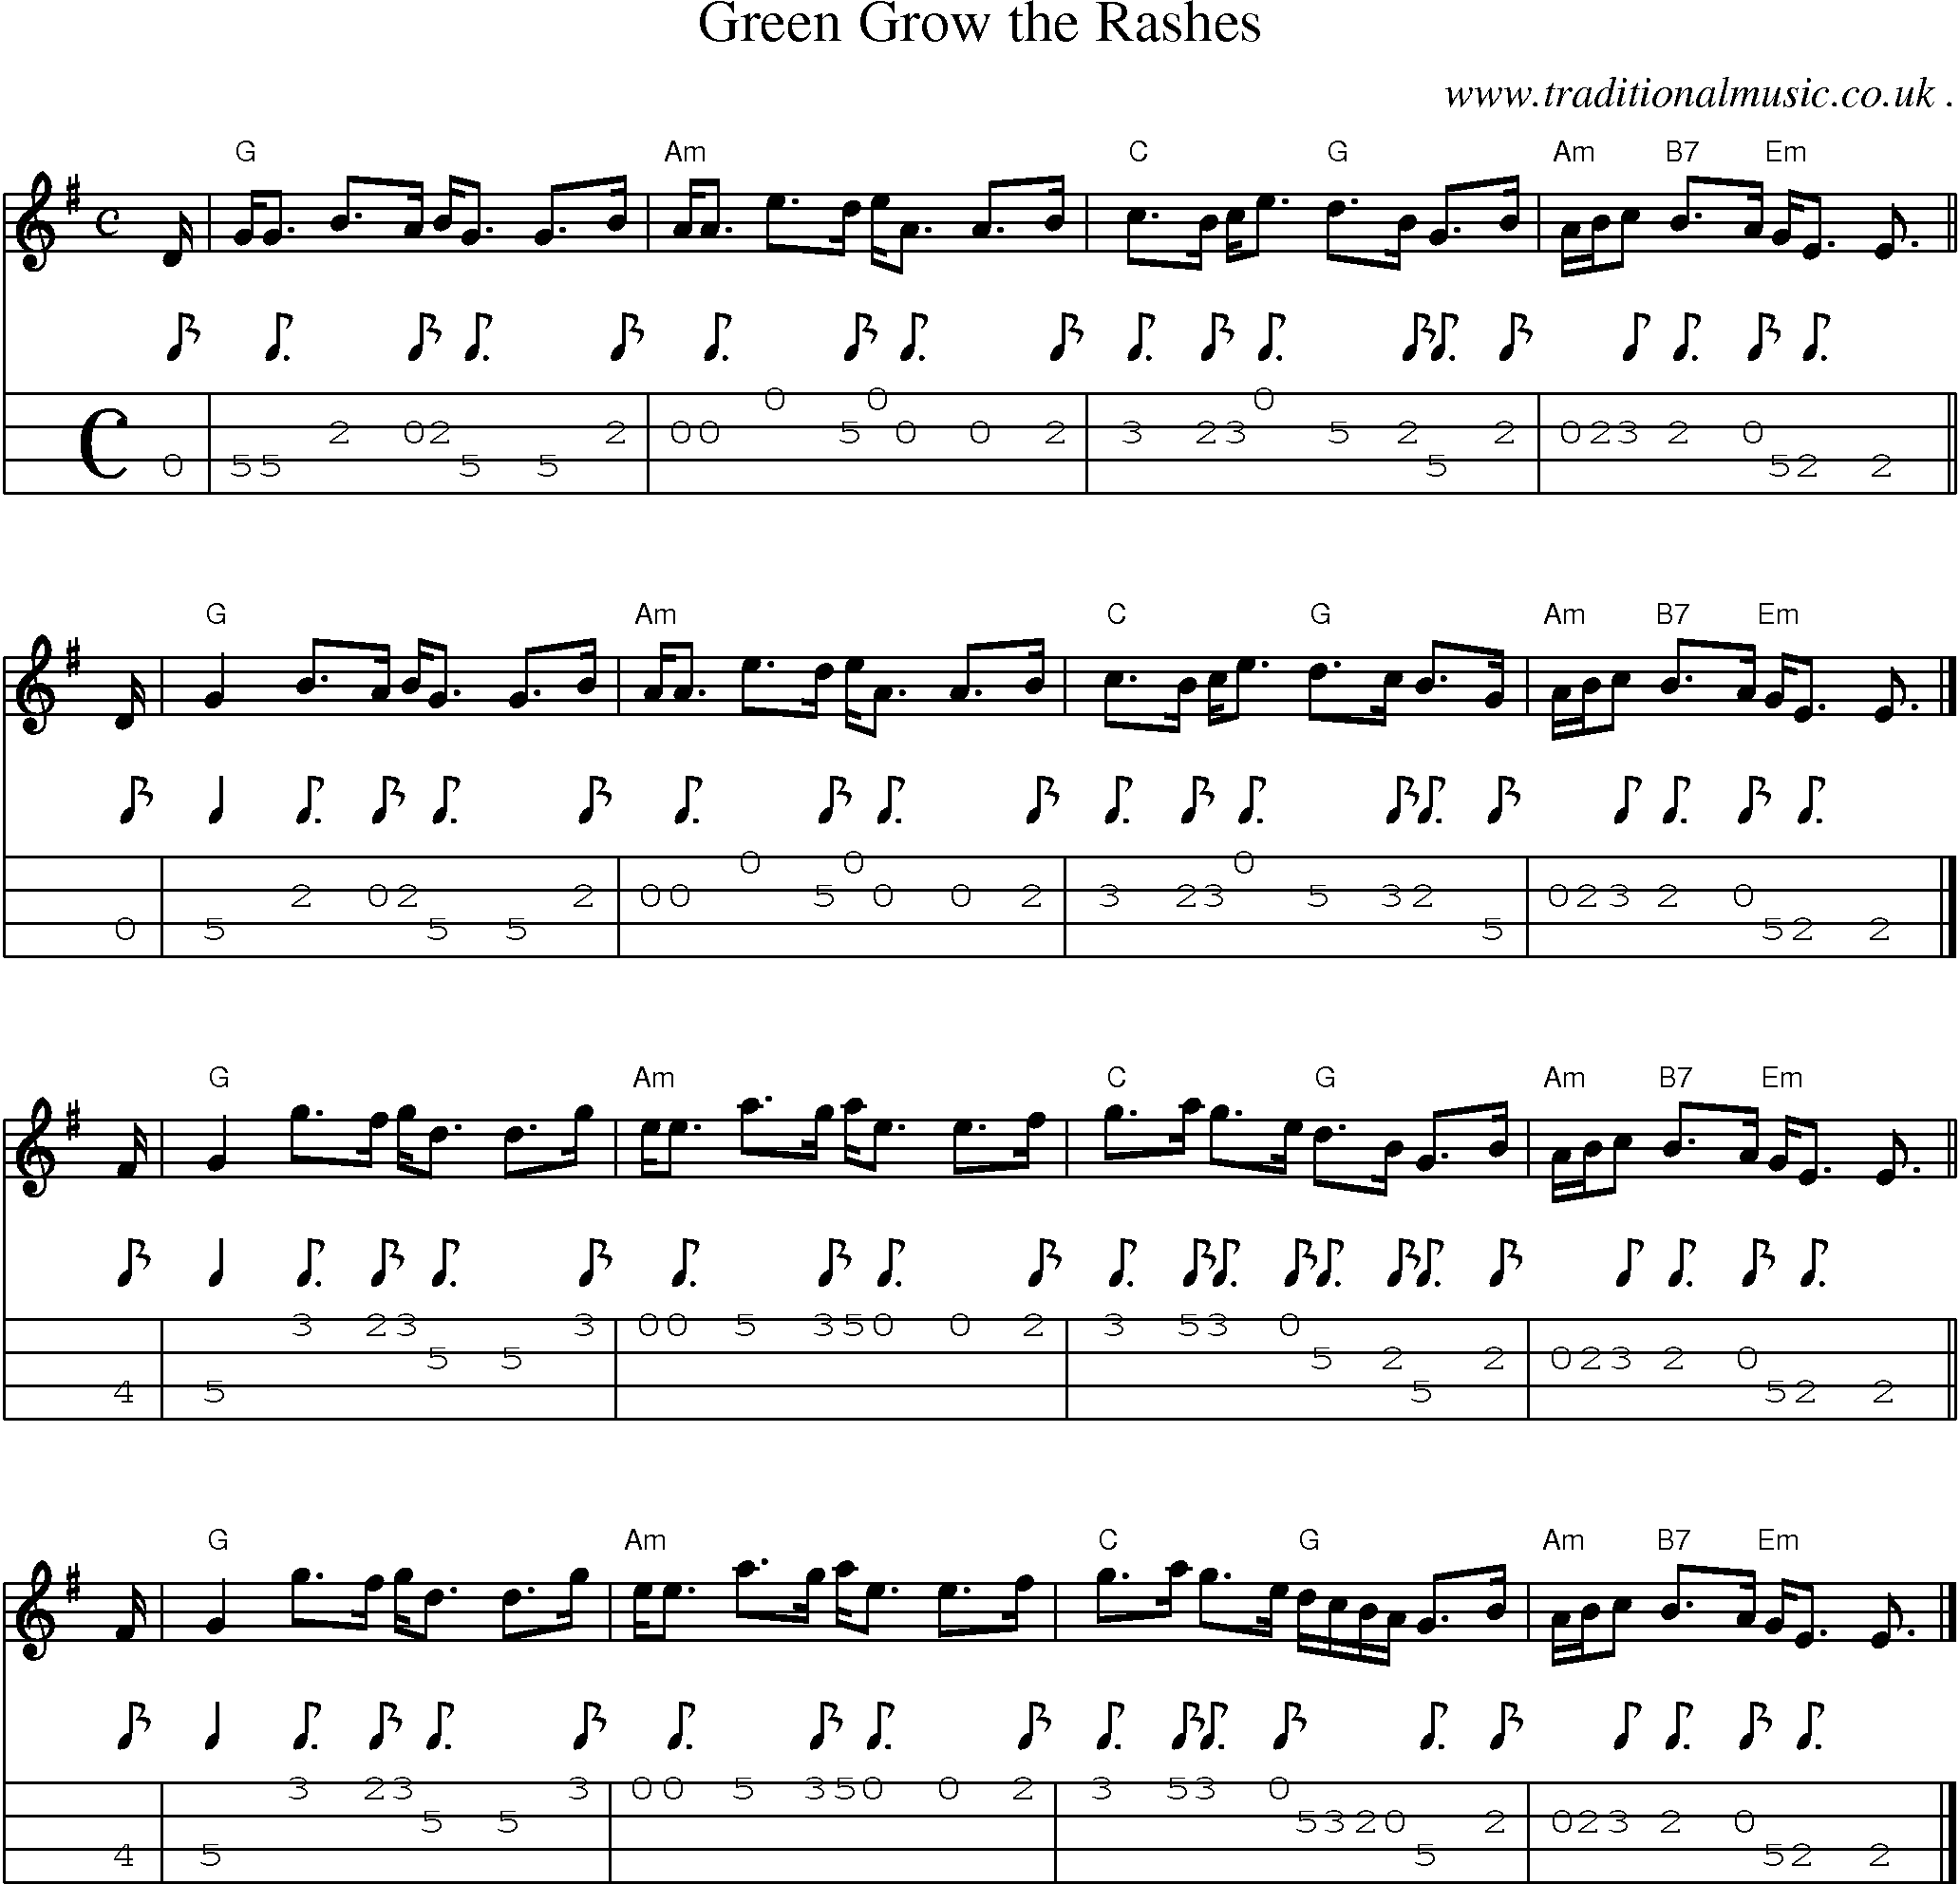 Sheet-music  score, Chords and Mandolin Tabs for Green Grow The Rashes